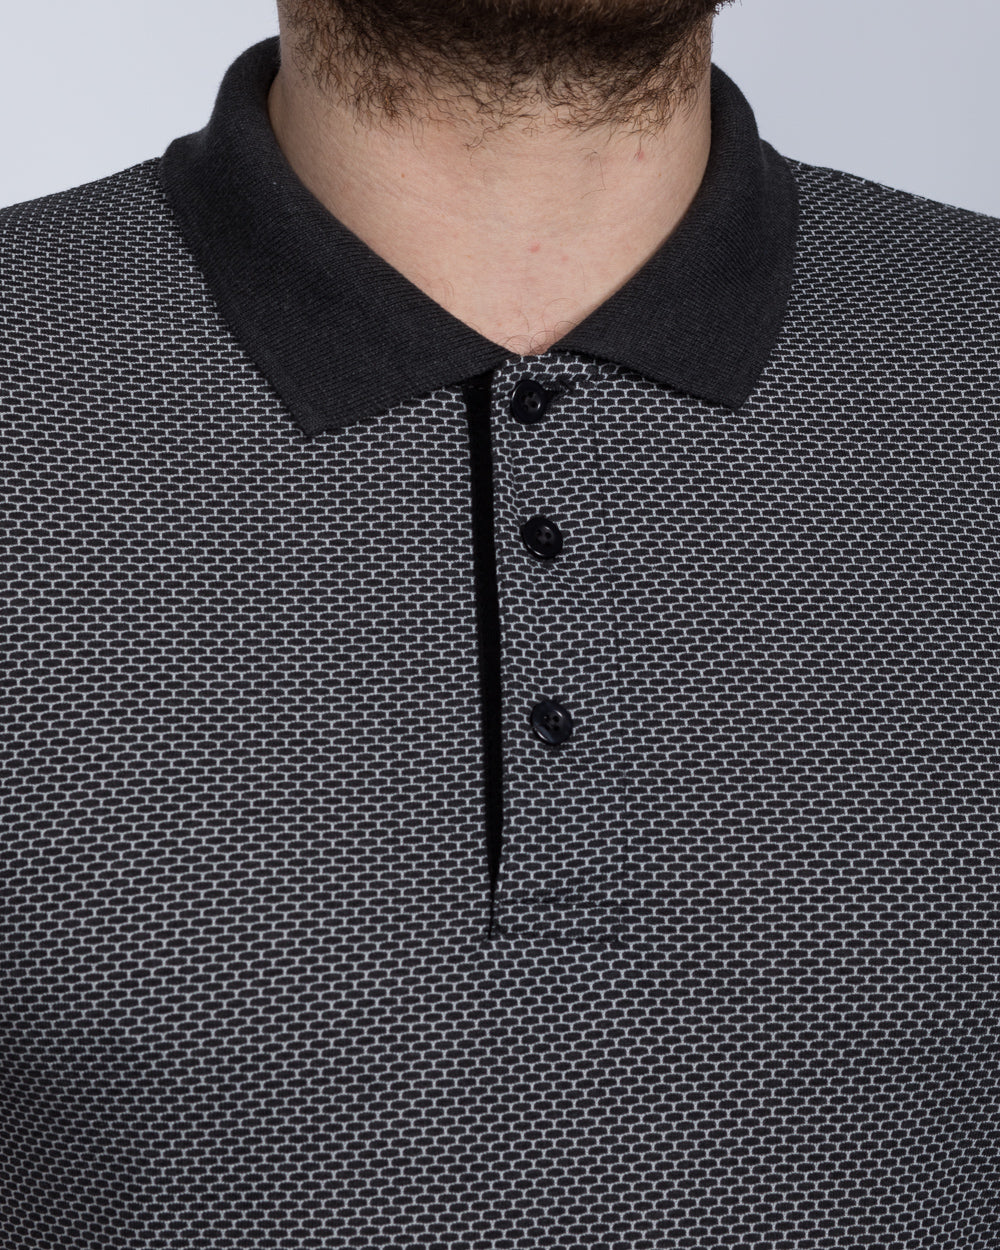 2t Slim Fit Patterned Tall Polo Shirt (charcoal)